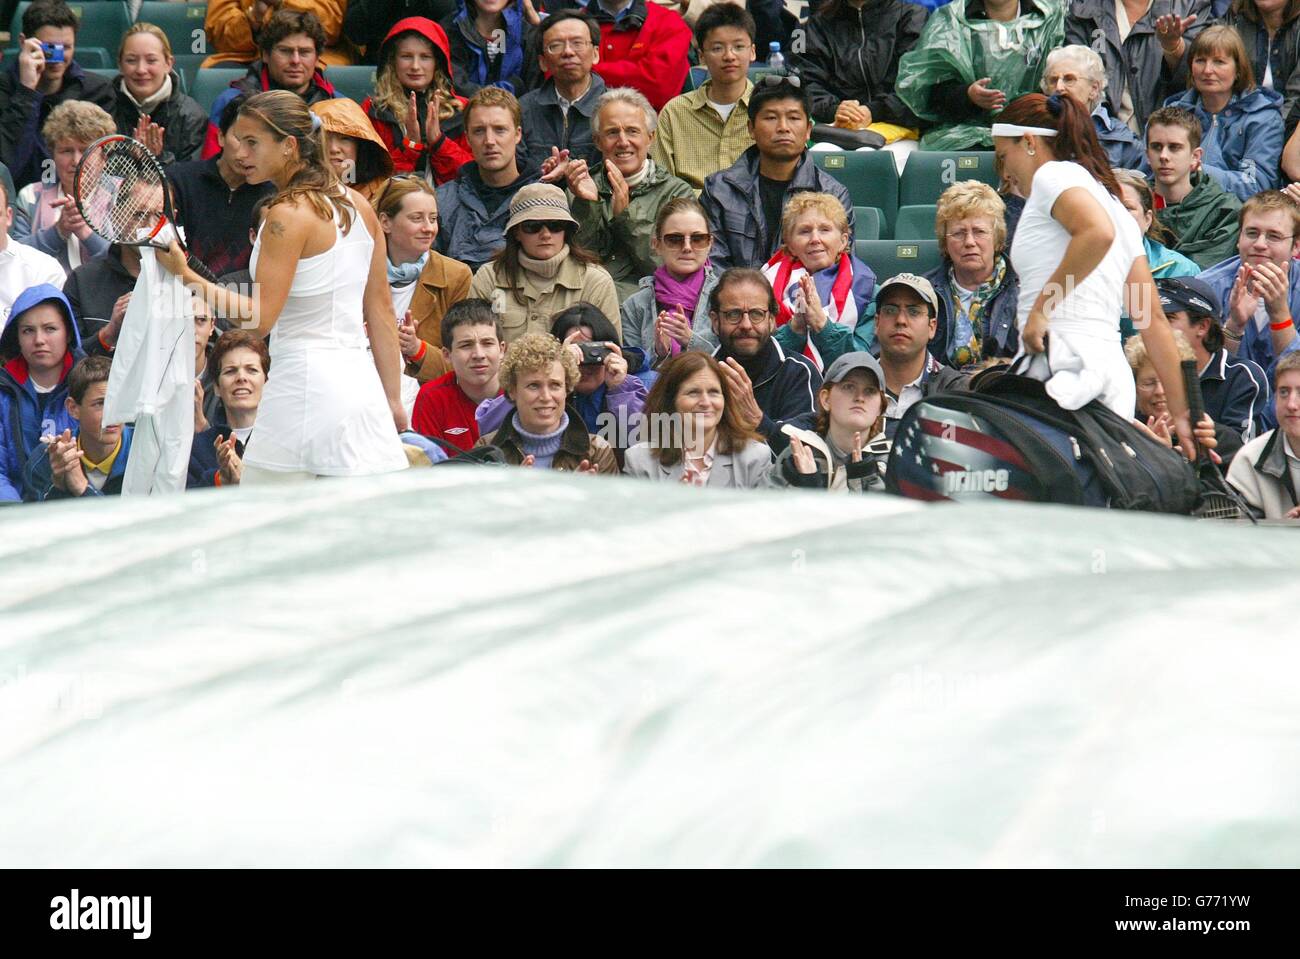 , NO COMMERCIAL USE. Amelie Mauresmo of France, the 9th seed (left) and Jennifer Capriati, the 3rd seed from the USA leave the court during a rain break in the first set at Wimbledon. Rain interrrupted play on several occasions. Stock Photo